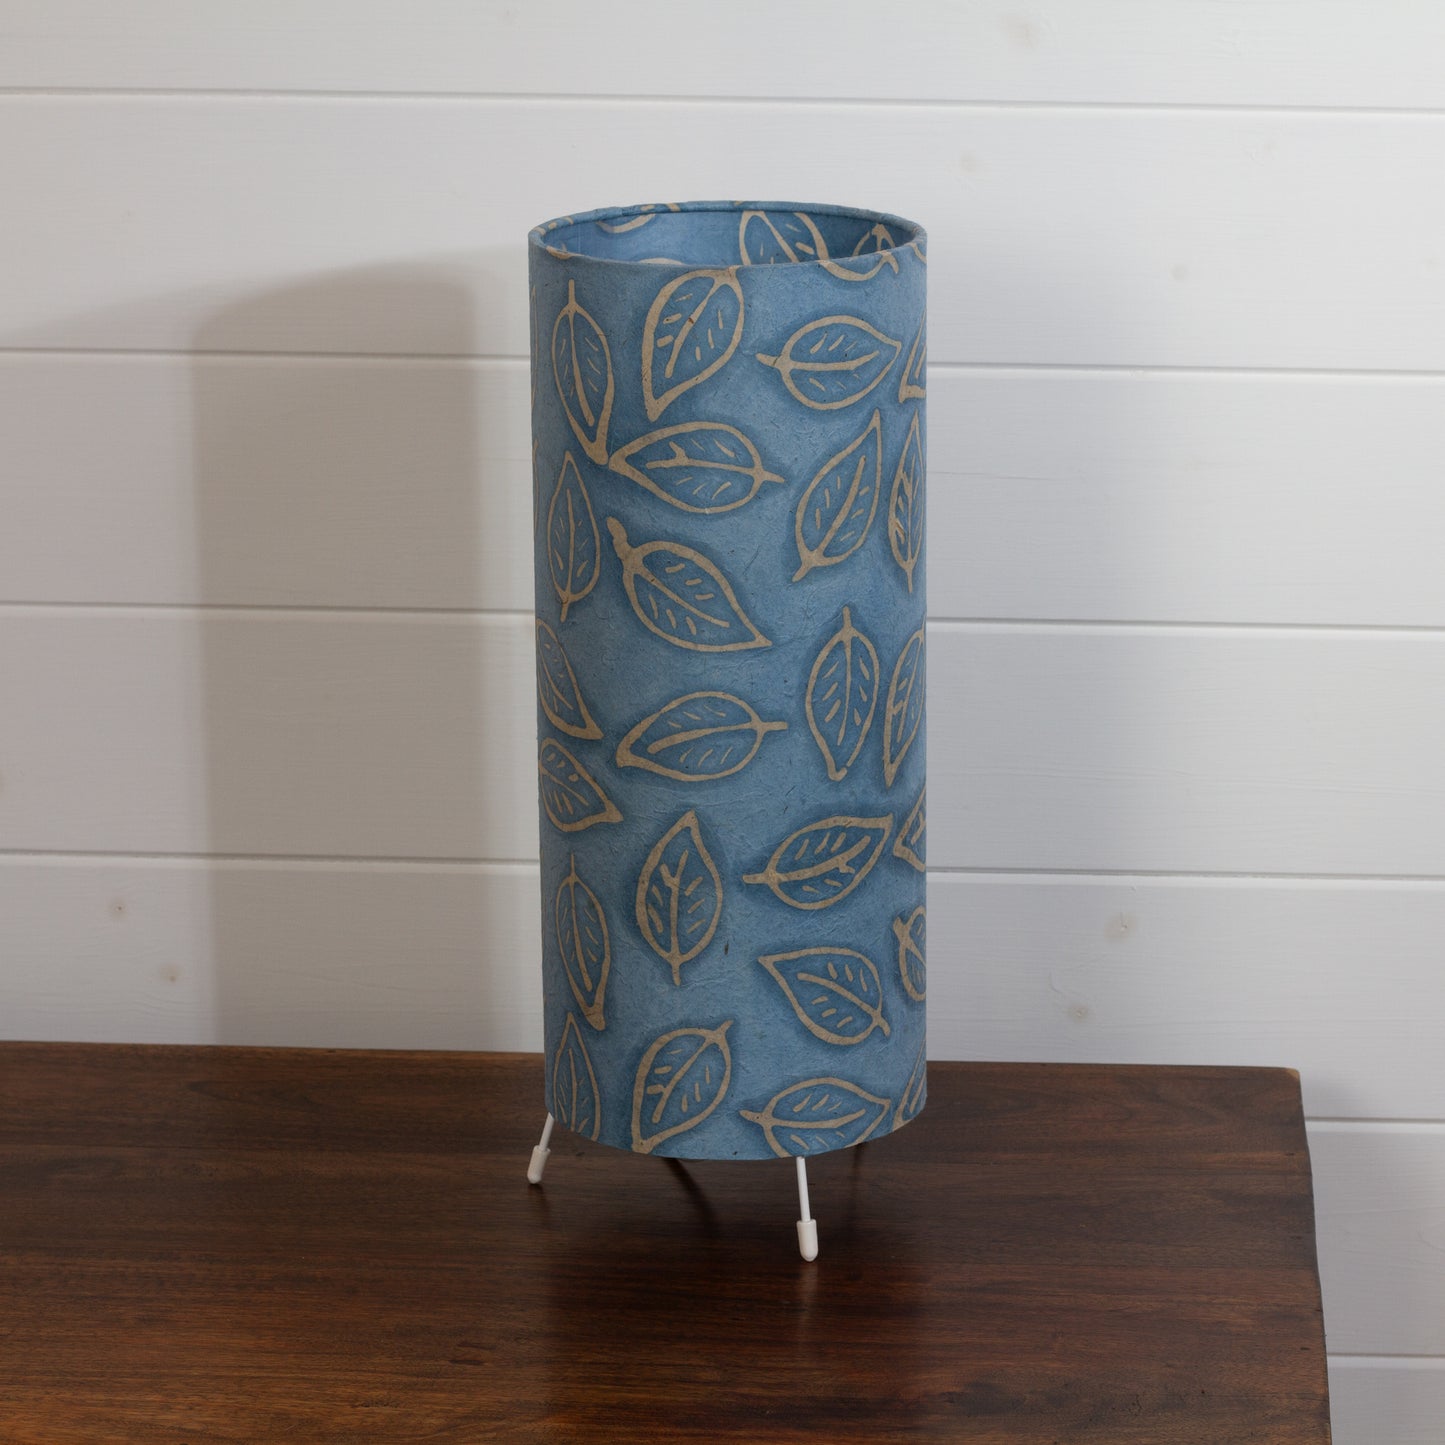 Free Standing Table Lamp Small - P31 ~ Batik Leaf on Blue